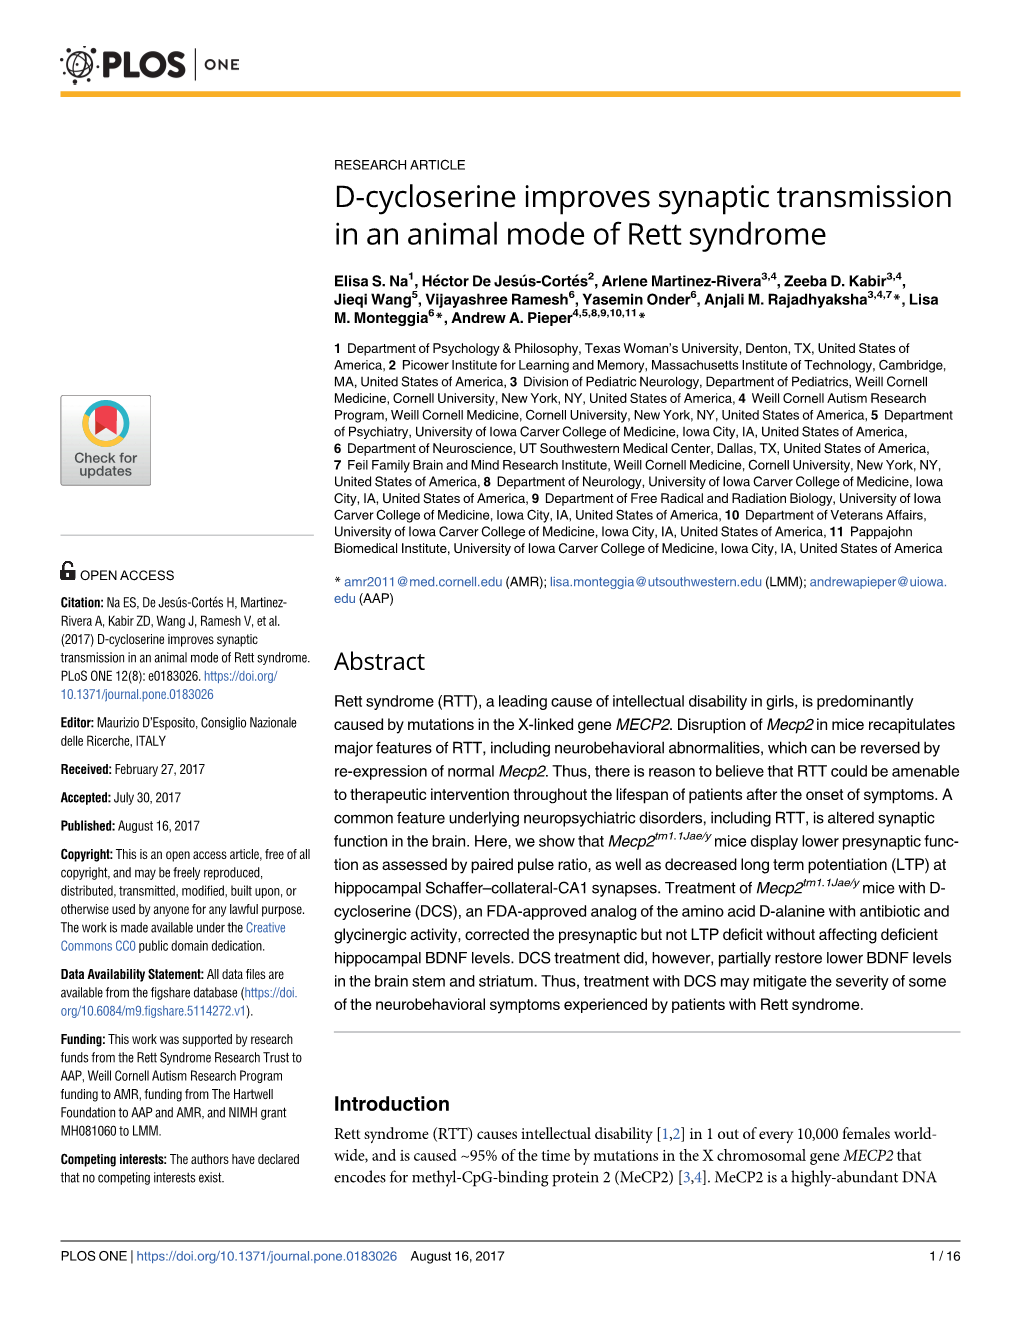 D-Cycloserine Improves Synaptic Transmission in an Animal Mode of Rett Syndrome